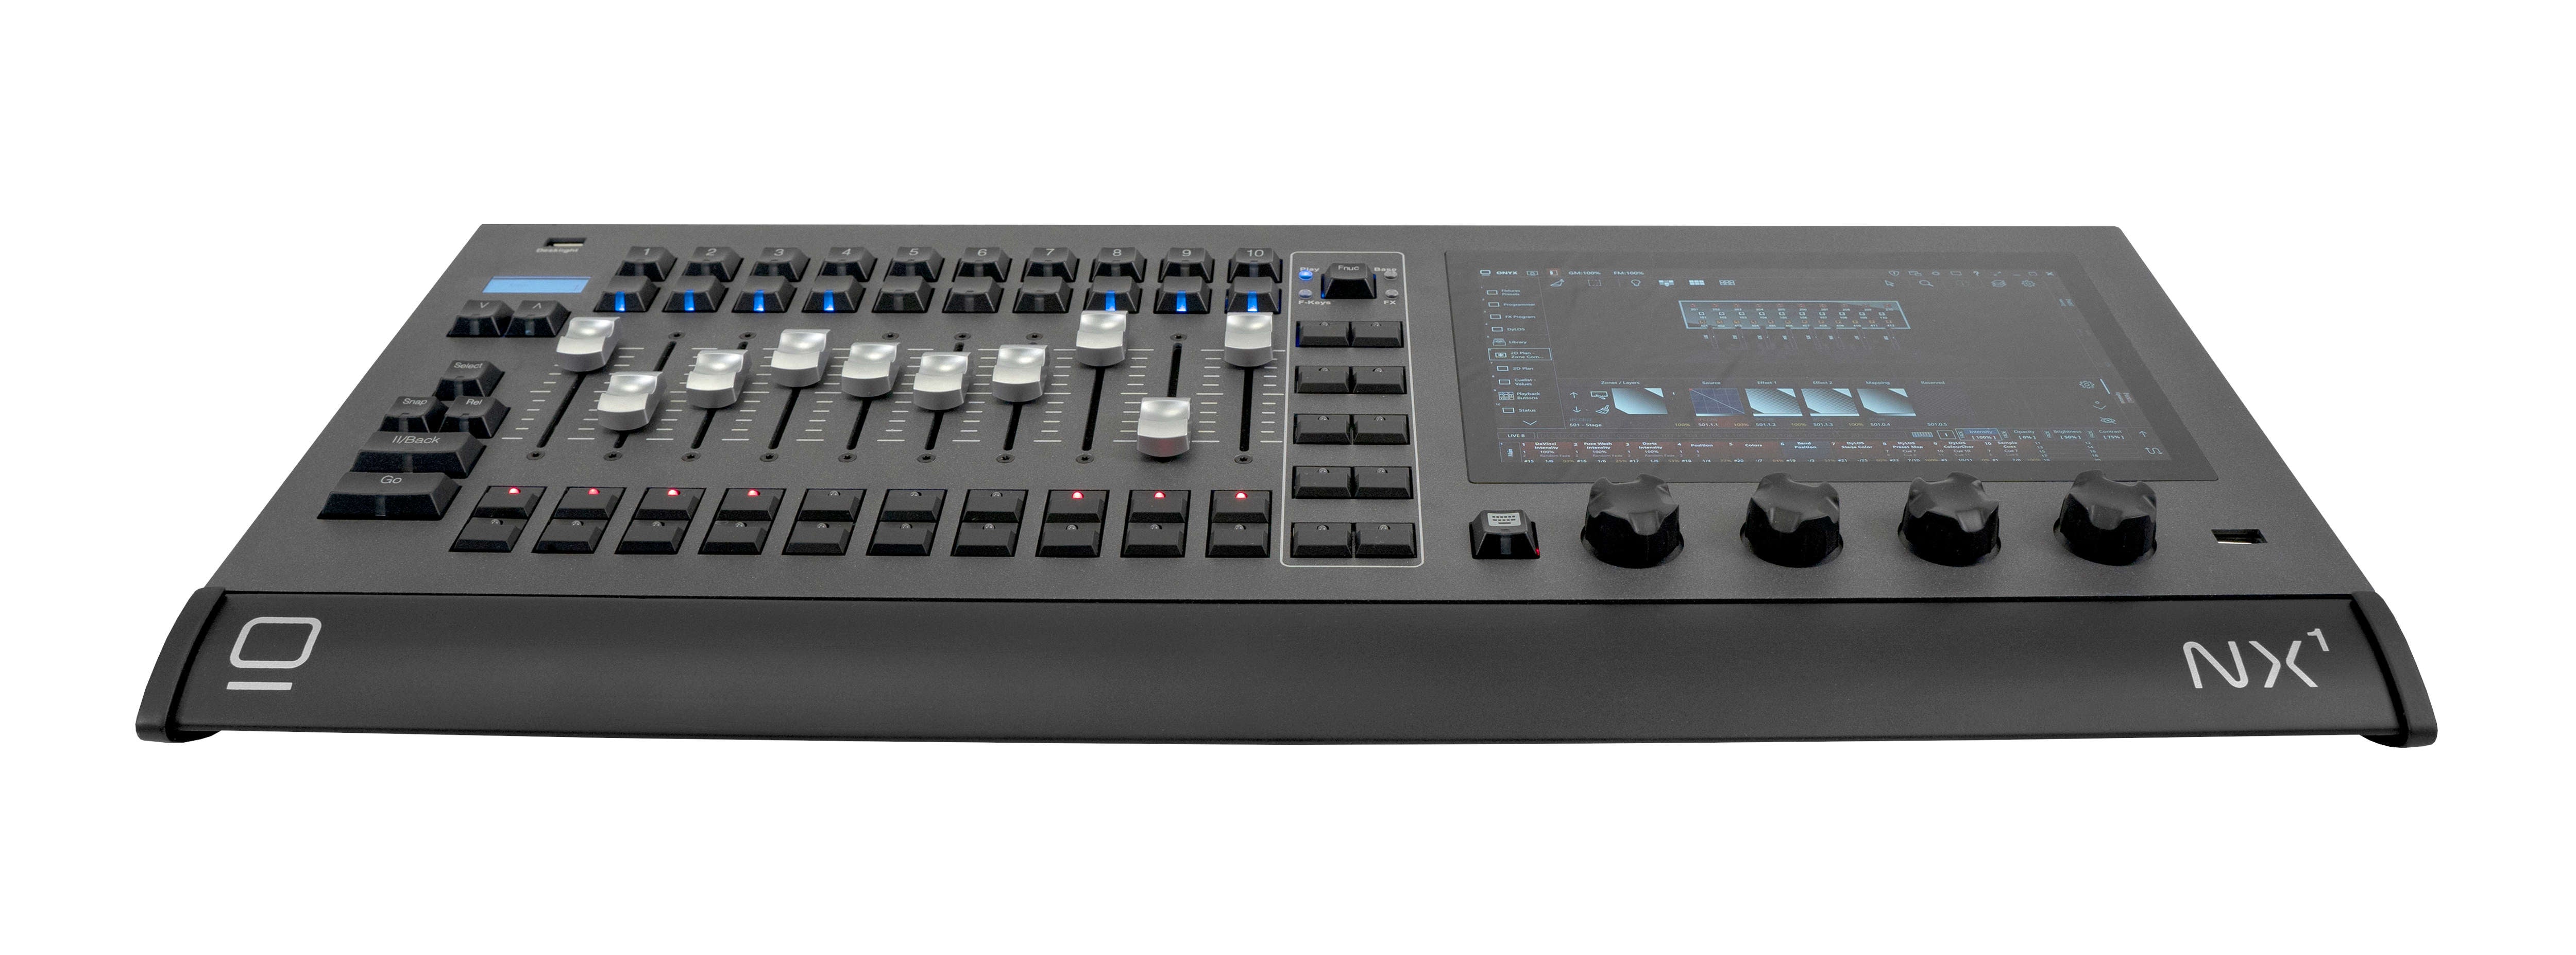 Obsidian Control Systems NX1 8 Universe, 10 Motorized Playback ONYX Lighting Controller